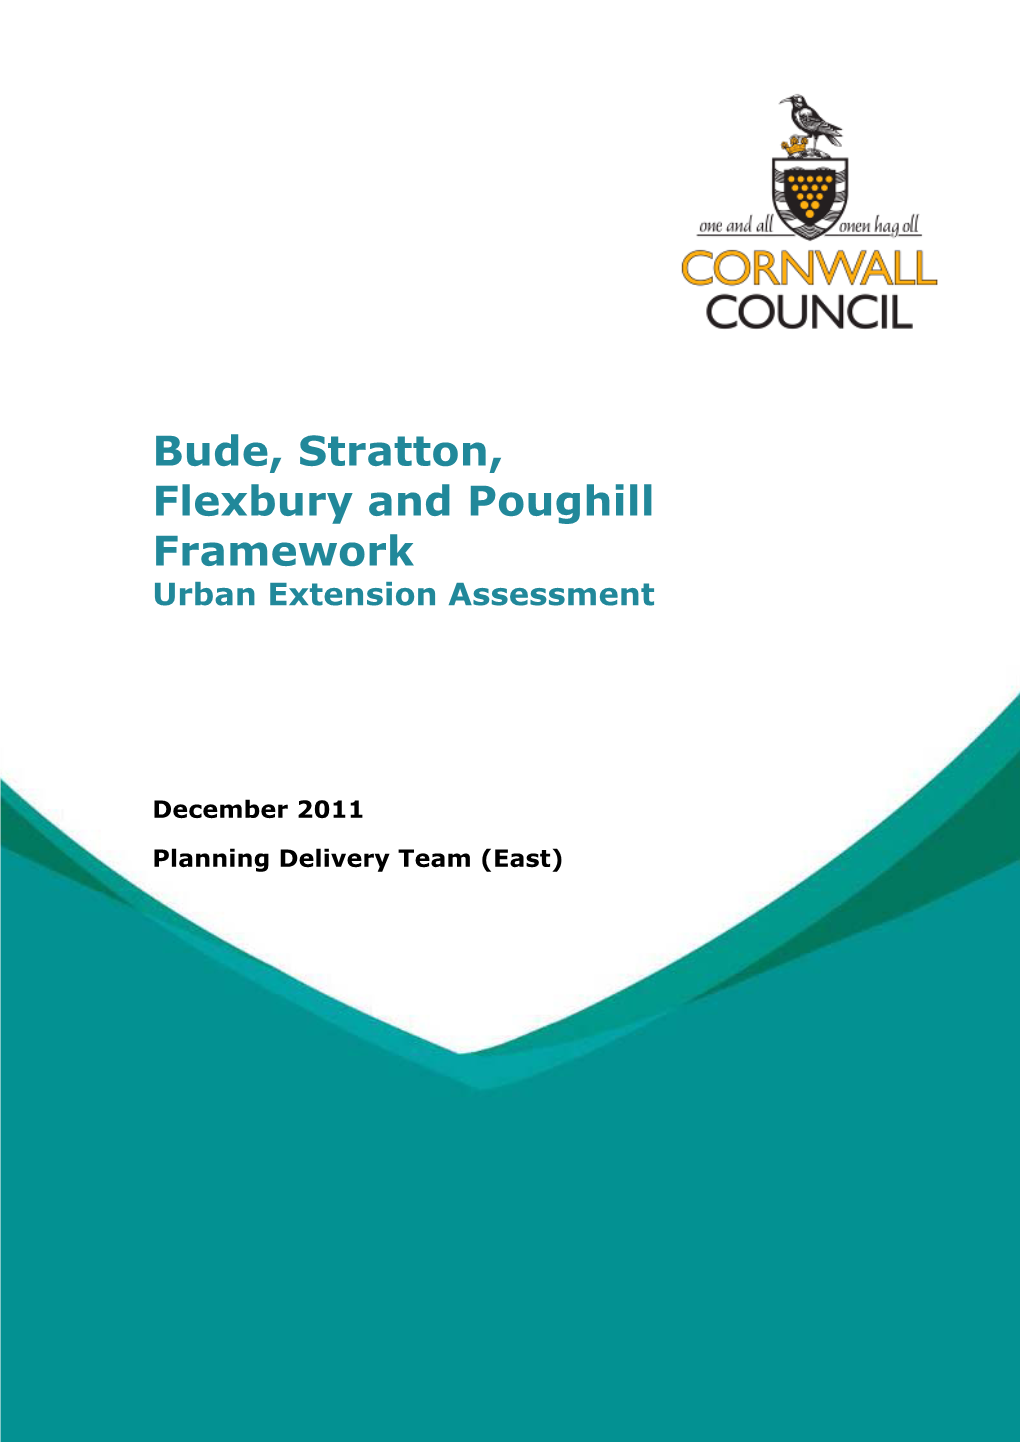 Bude, Stratton, Flexbury and Poughill Framework: Urban Extensions Assessment 2